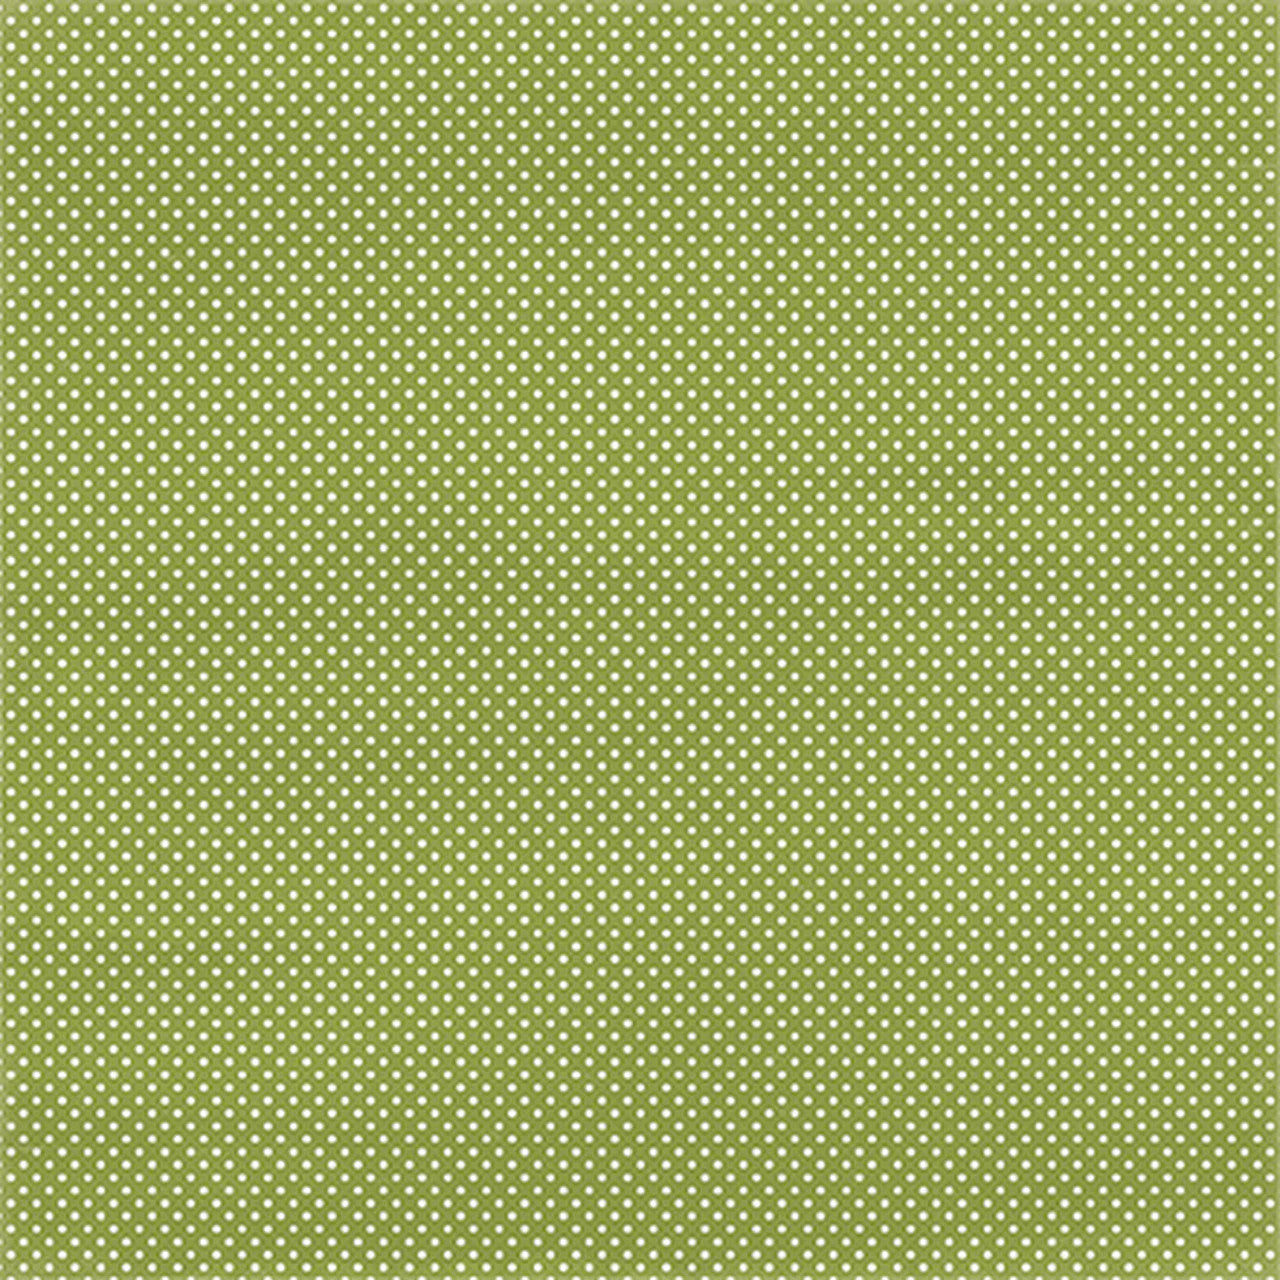 12x12 cardstock with small white dots on apple green background